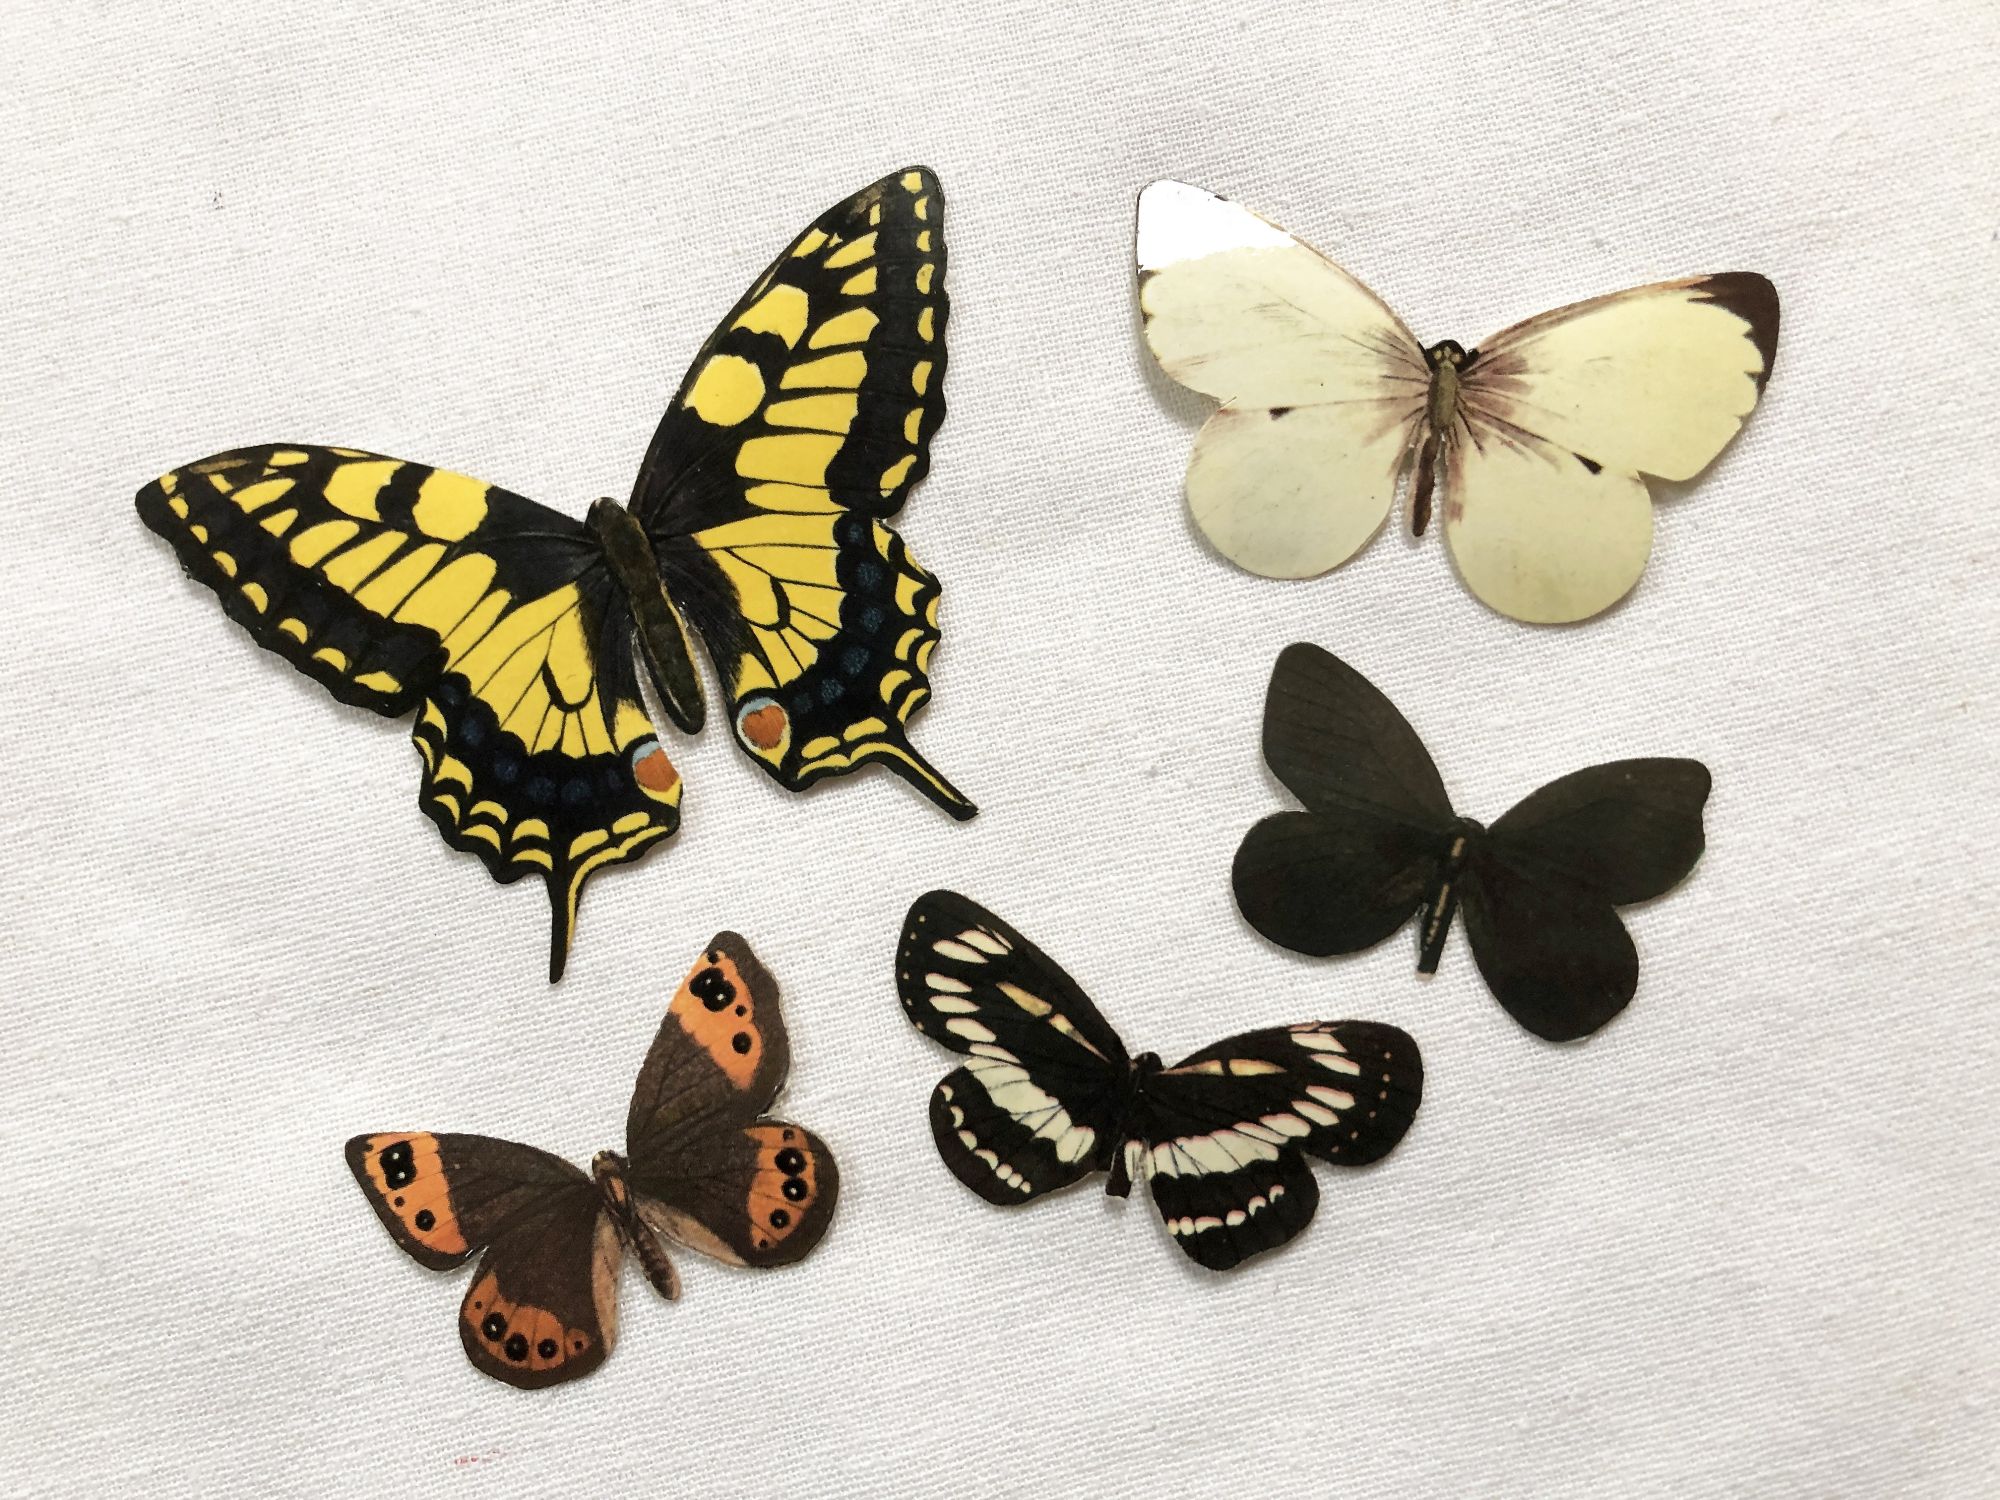 Sets of 5 sticky advertising butterflies from a French biscuit company in the 1960s